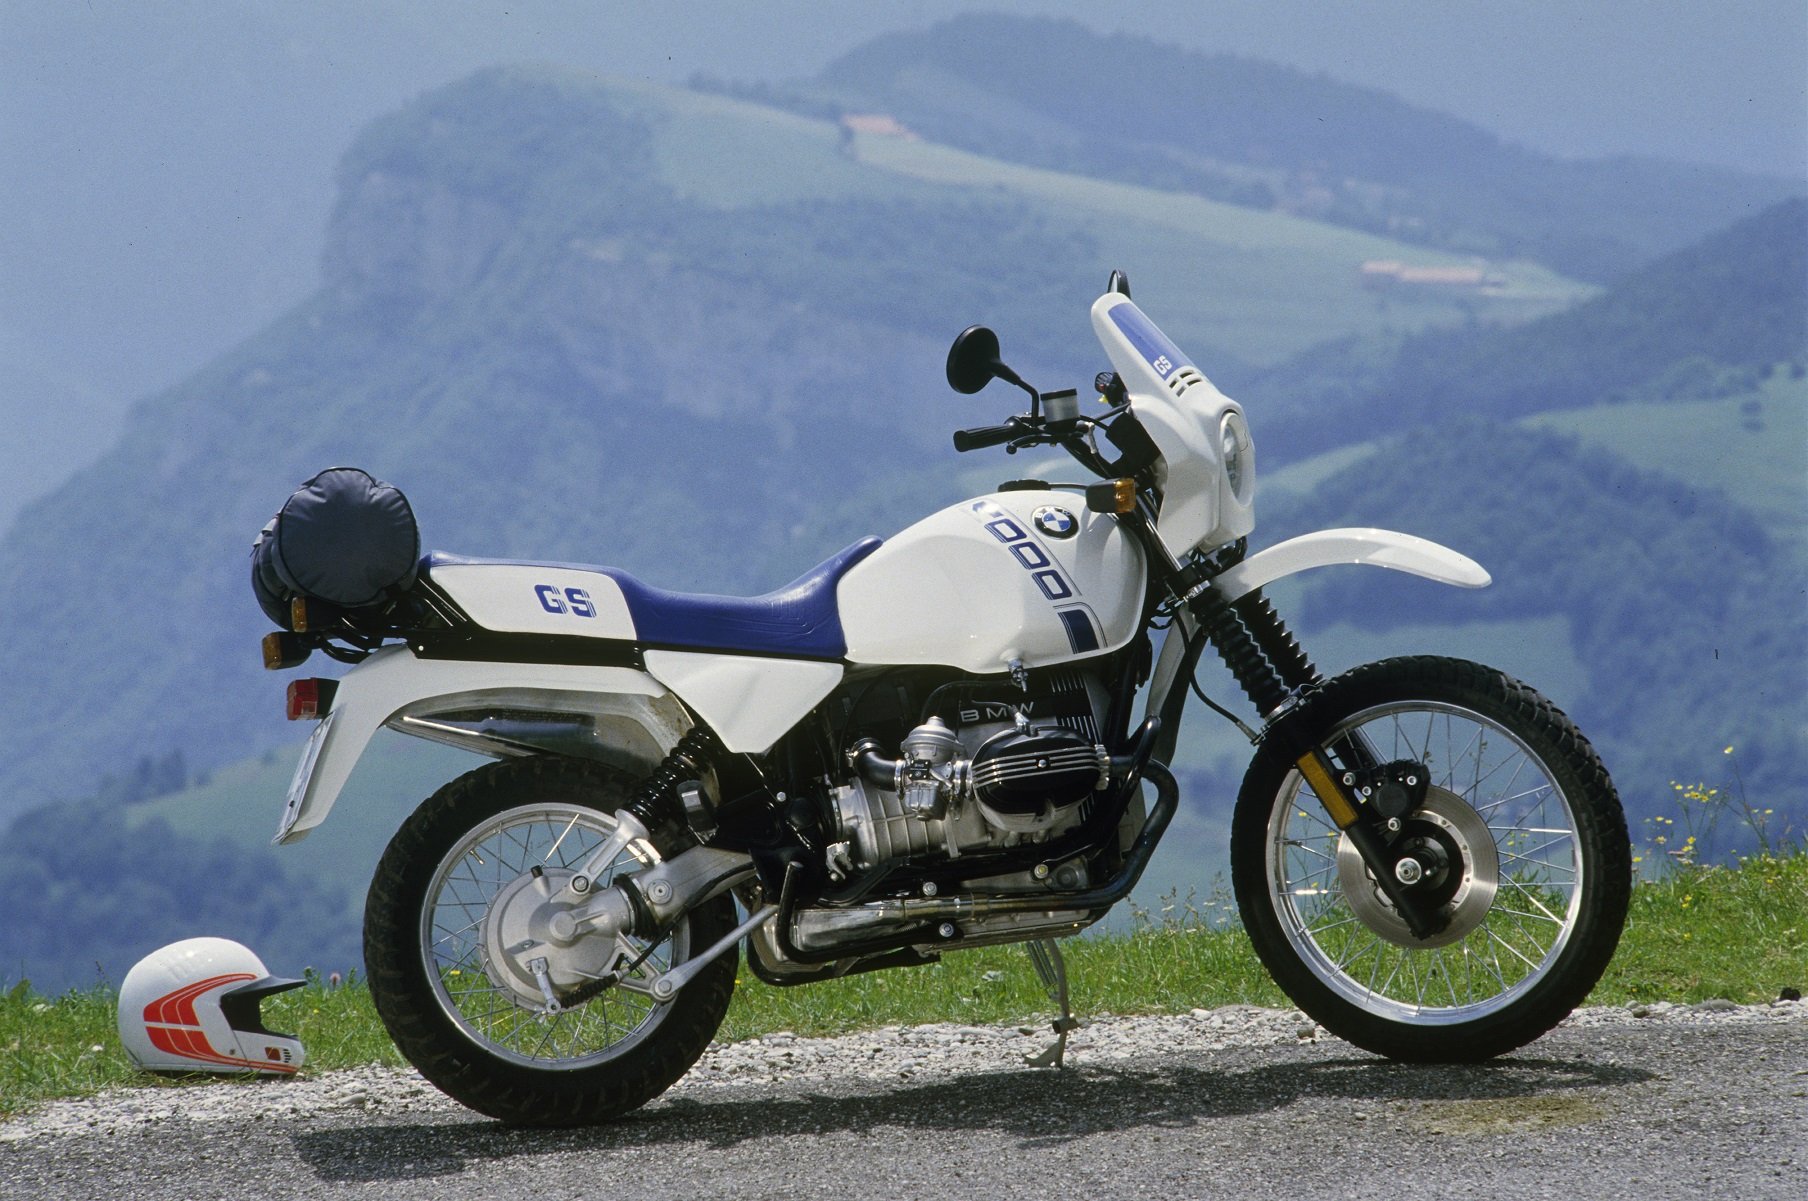 R1300GS - Page 2 1018925-bmw-r-100-gs-motorcyles-1987